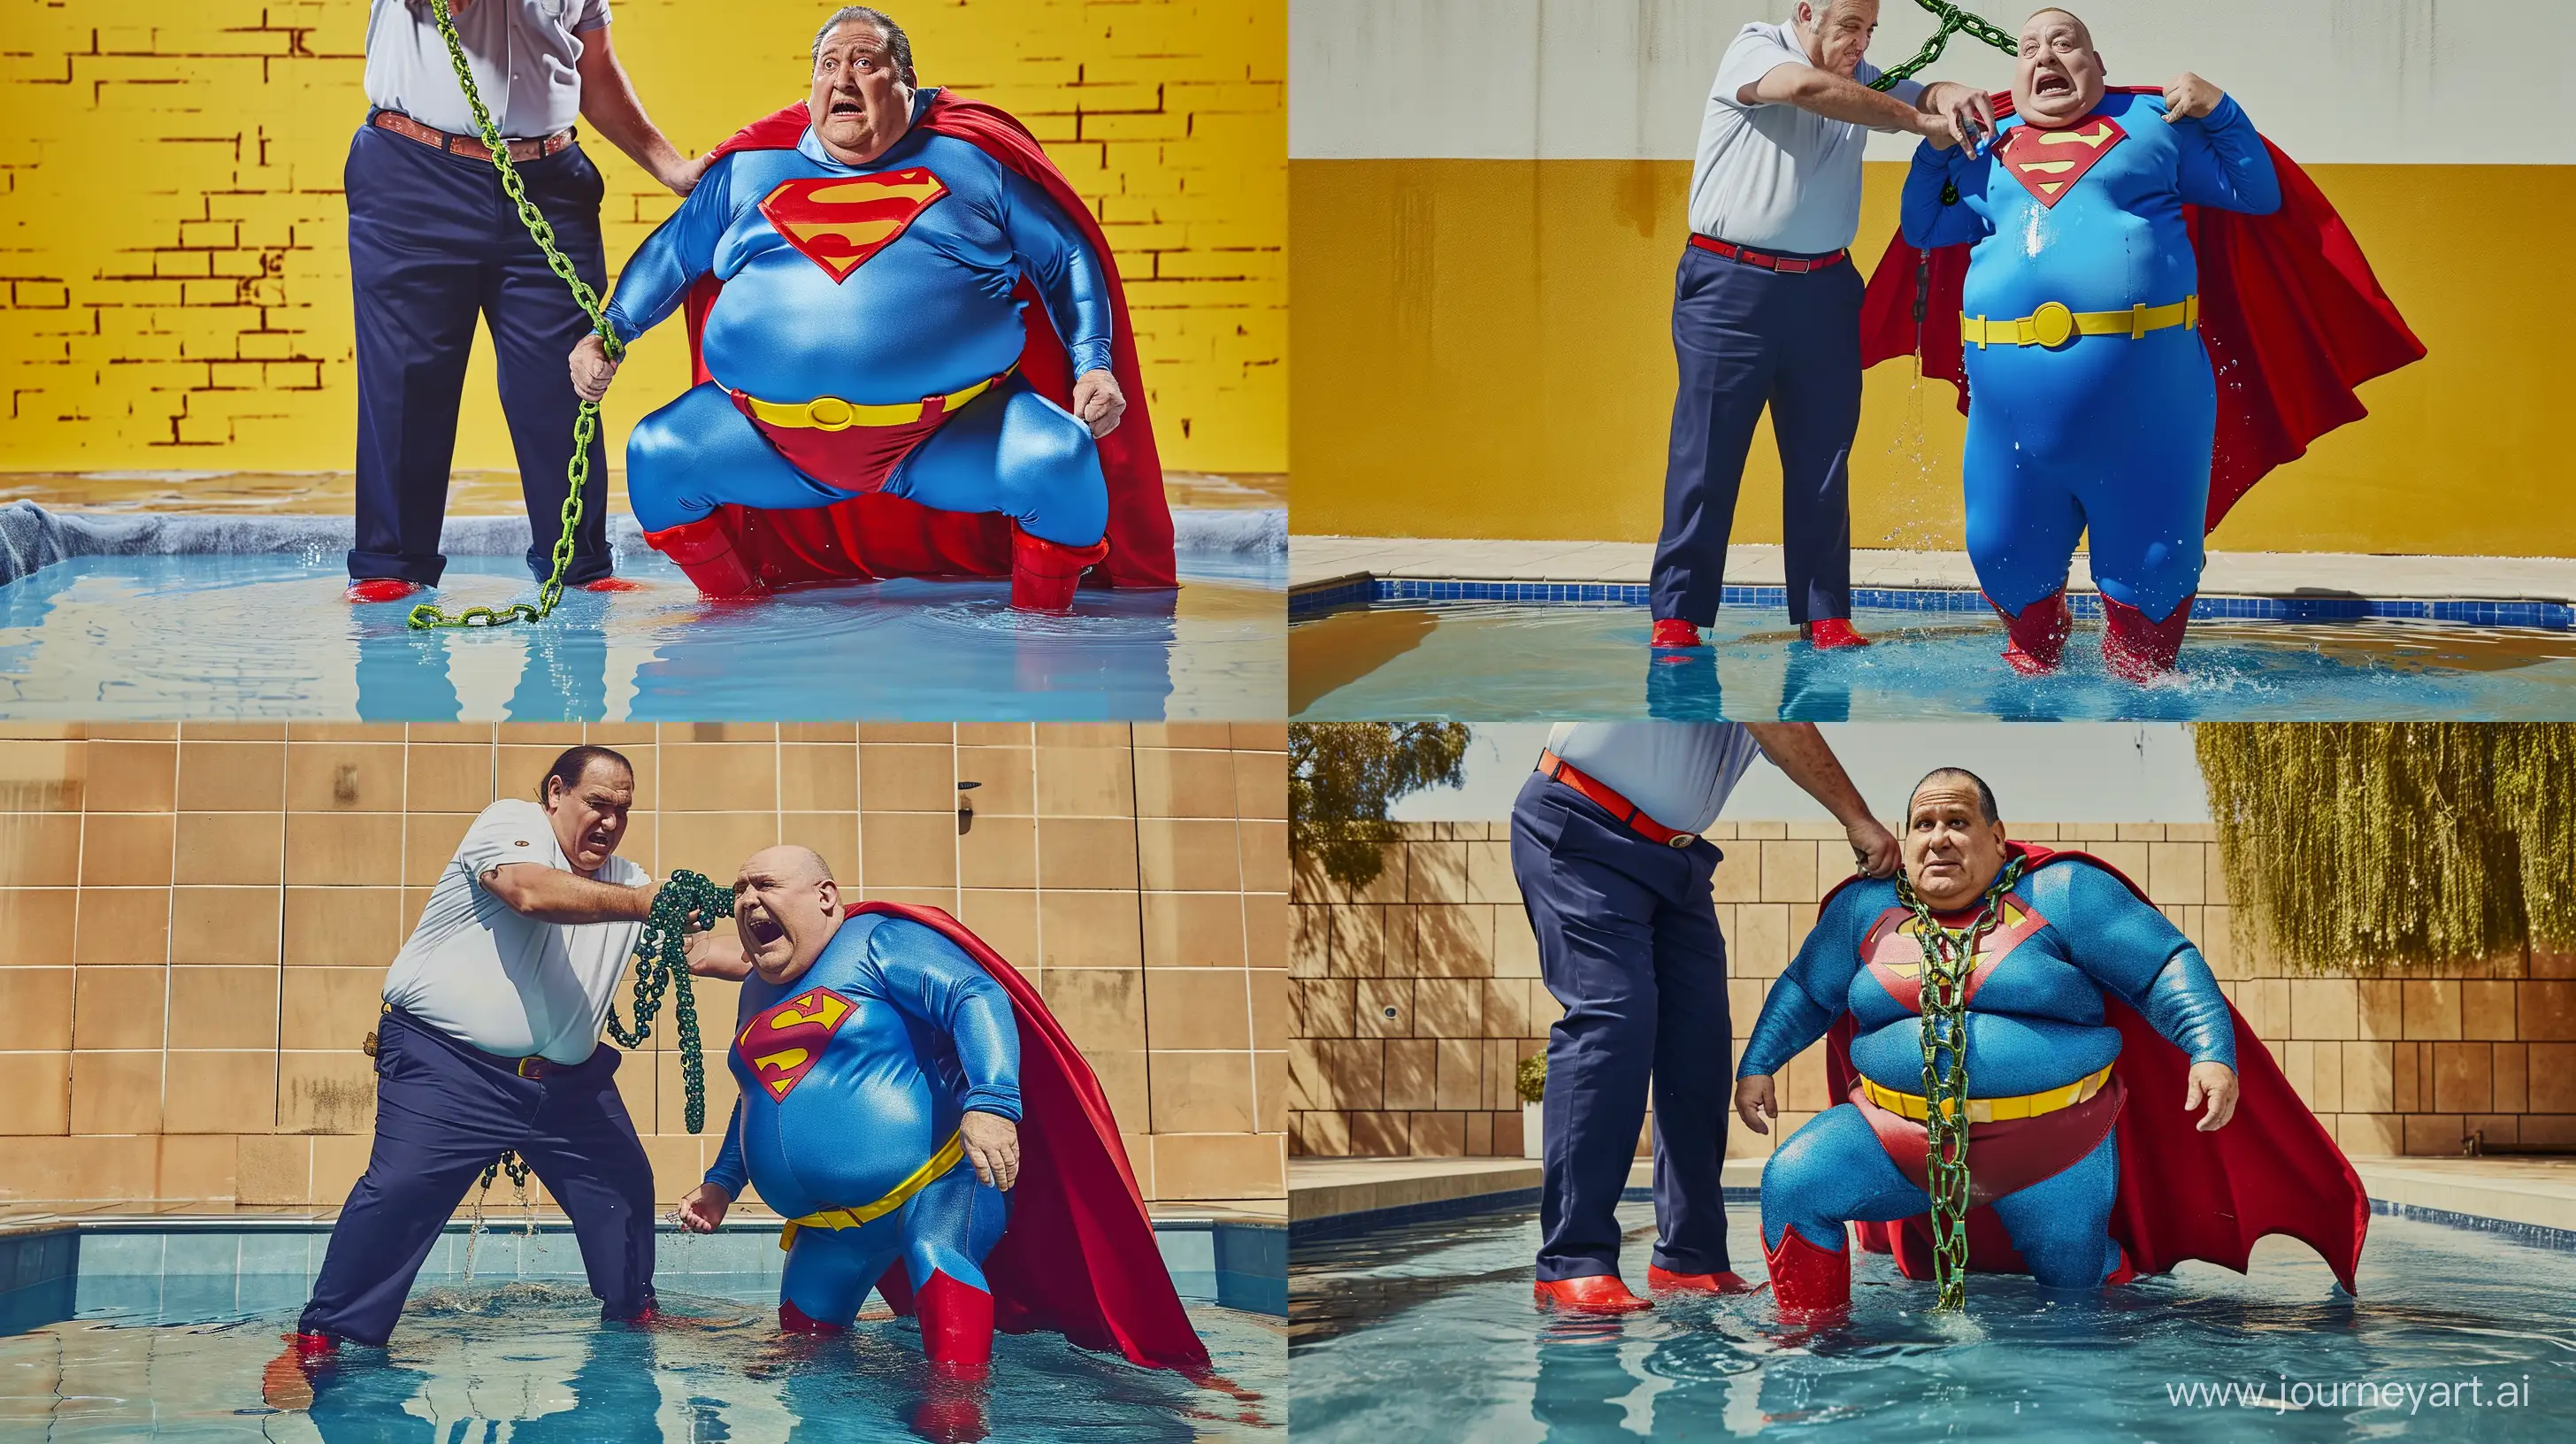 Fearful-Superman-Crawling-in-Shallow-Pool-Chained-by-Happy-Man